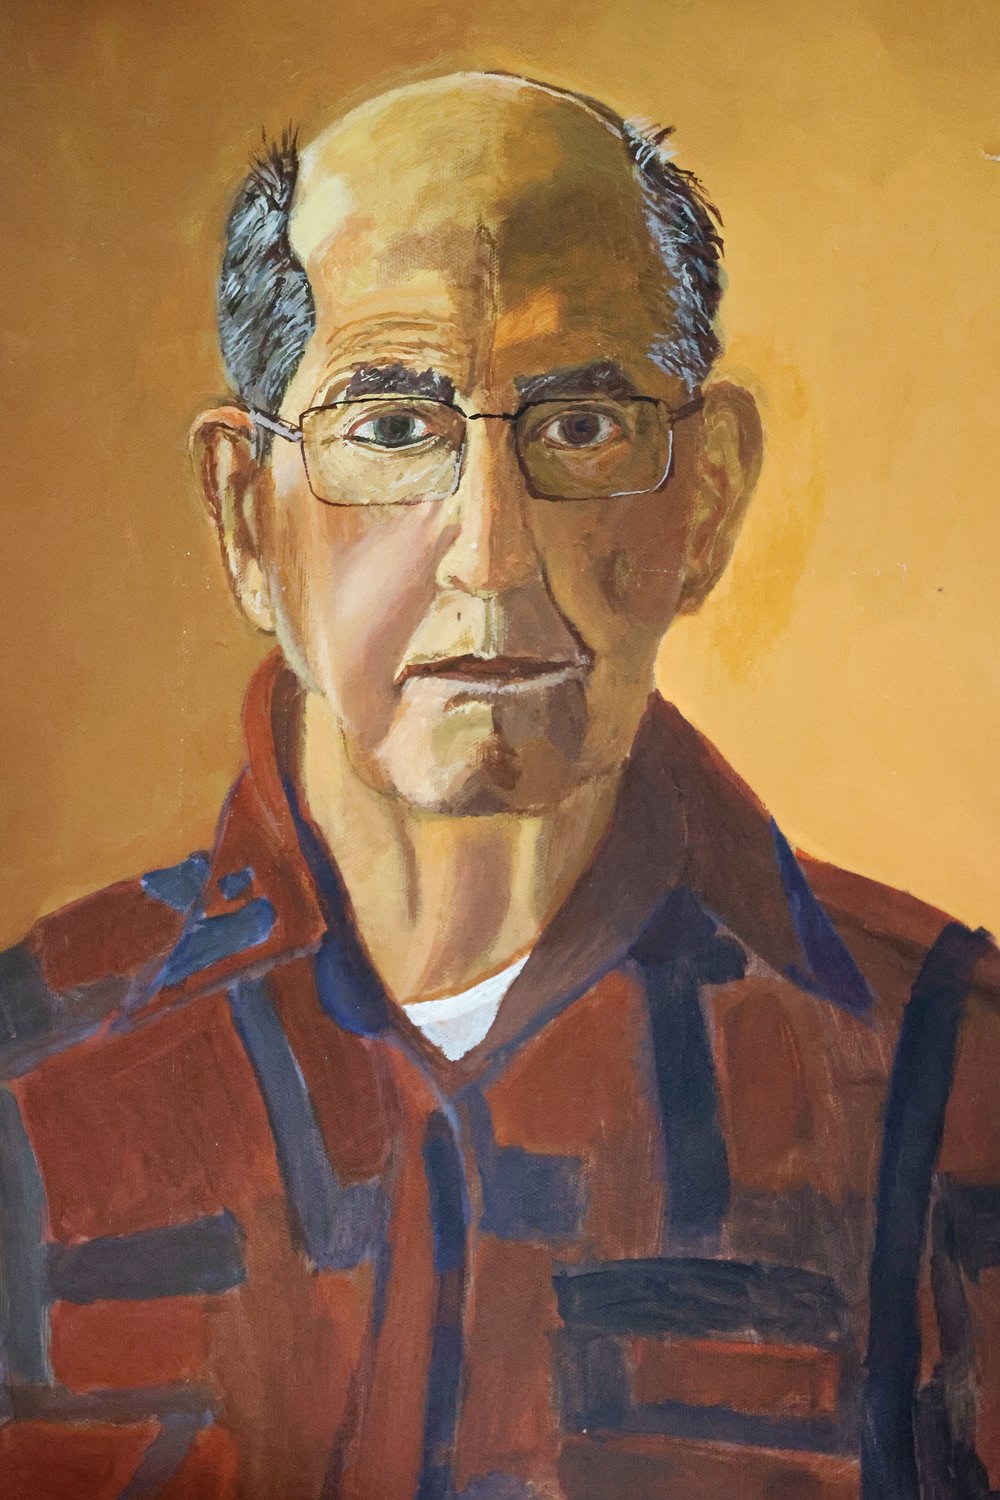 Father Raymond Tetrault left behind a legacy of colorful paintings. Beginning with religious scenes from the Bible, Father Raymond later painted portraits that reflected injustices he perceived in society. Pictured: A self portrait of Father Raymond